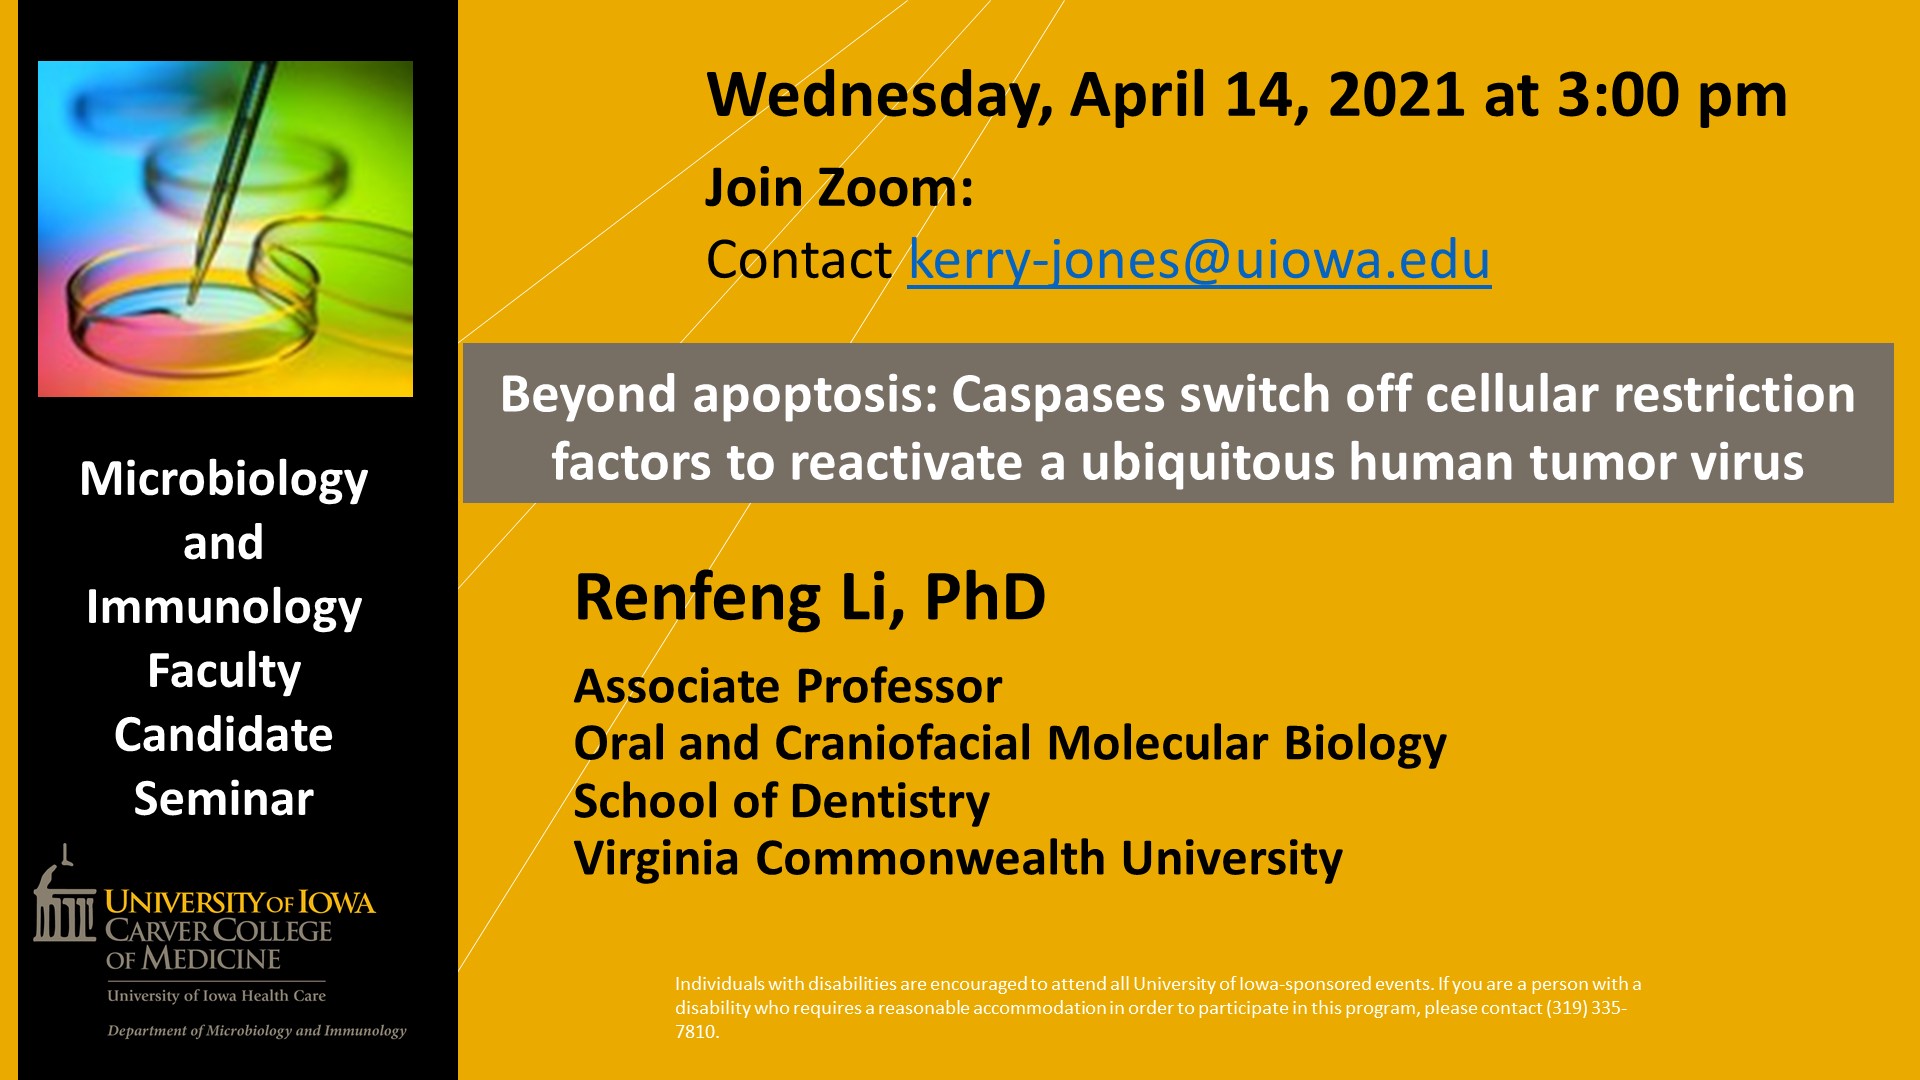 Faculty Candidate - Renfeng Li, PhD April 14 at 3pm